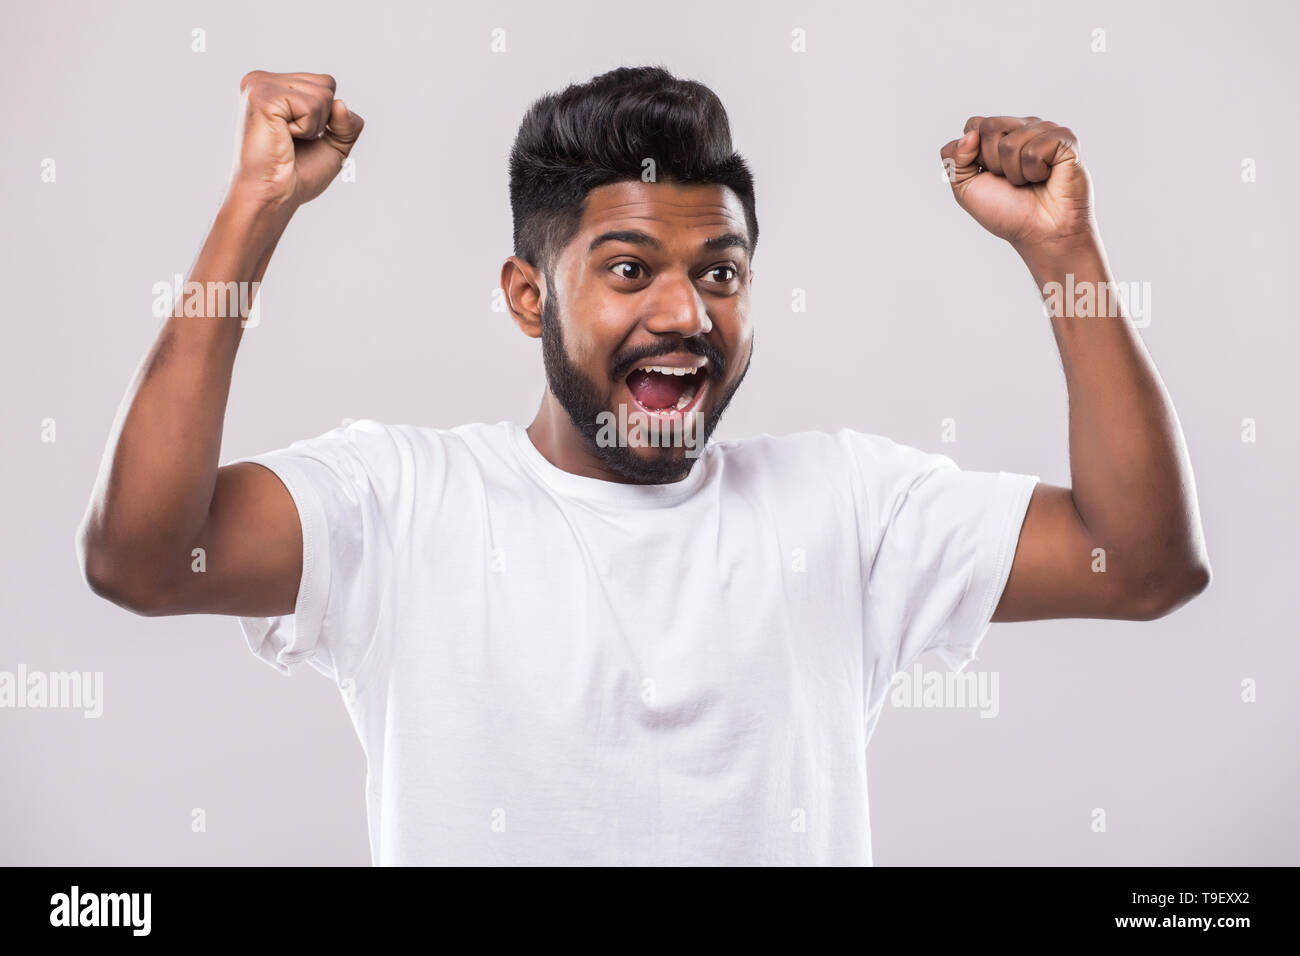 J'ai gagné. Happy young Indian man gesturing et smiling while standing against white background Banque D'Images